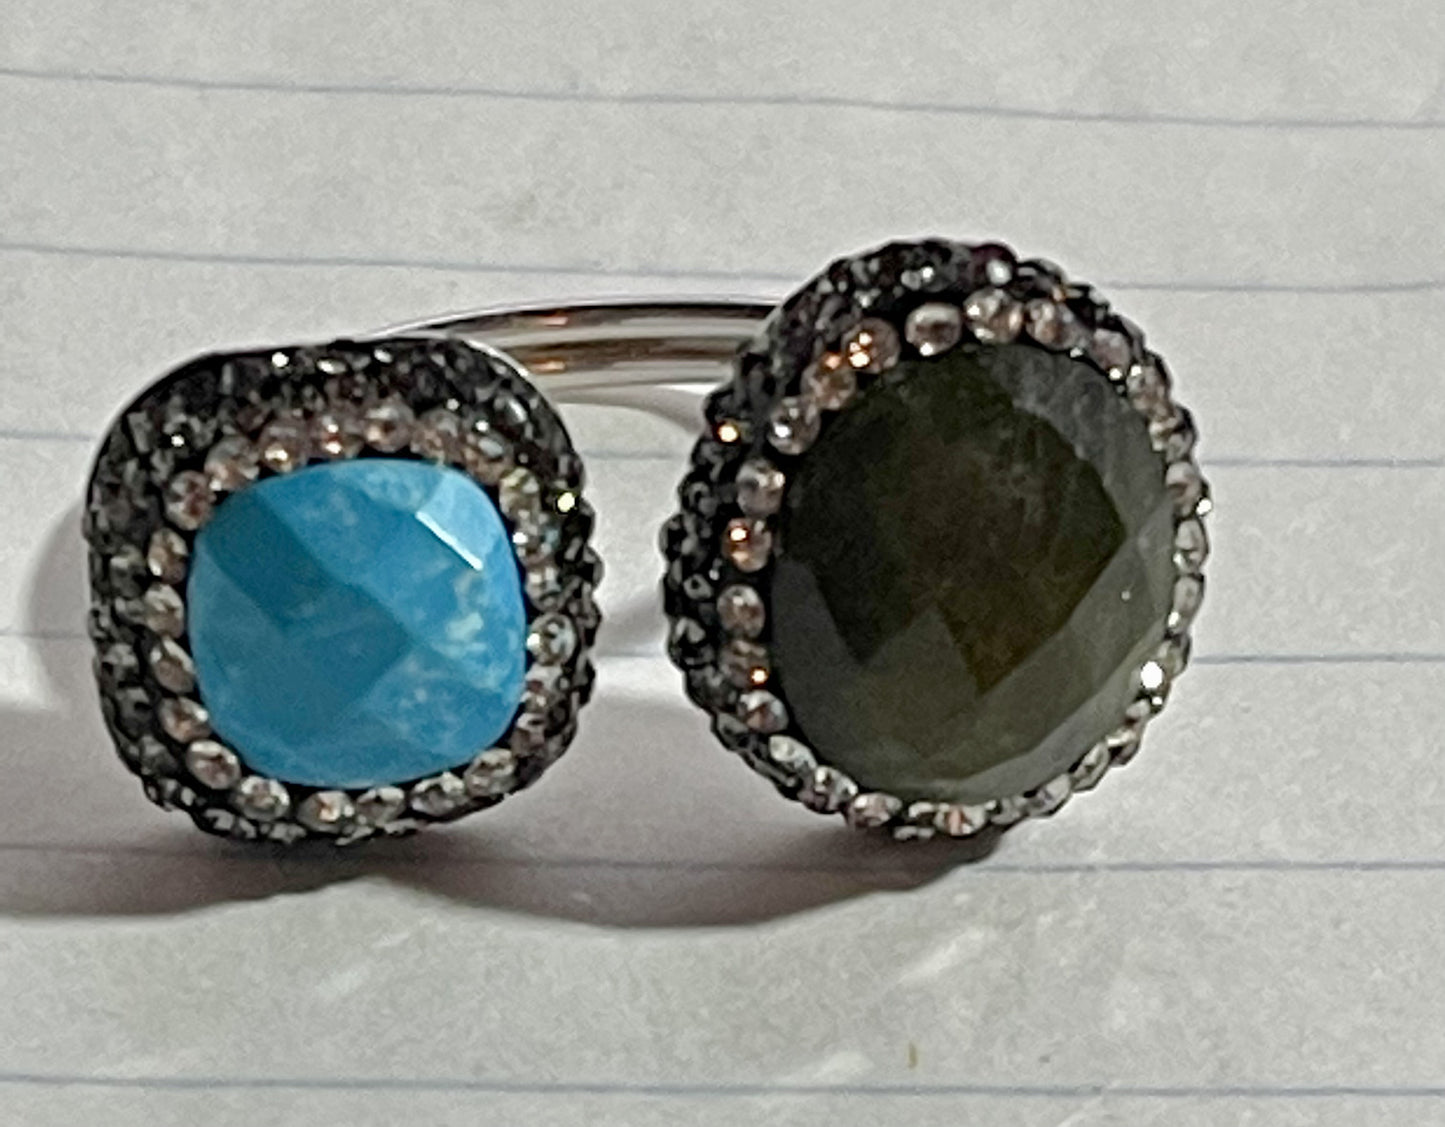 Turquoise, Labradorite and Cubic Zirconia Ring